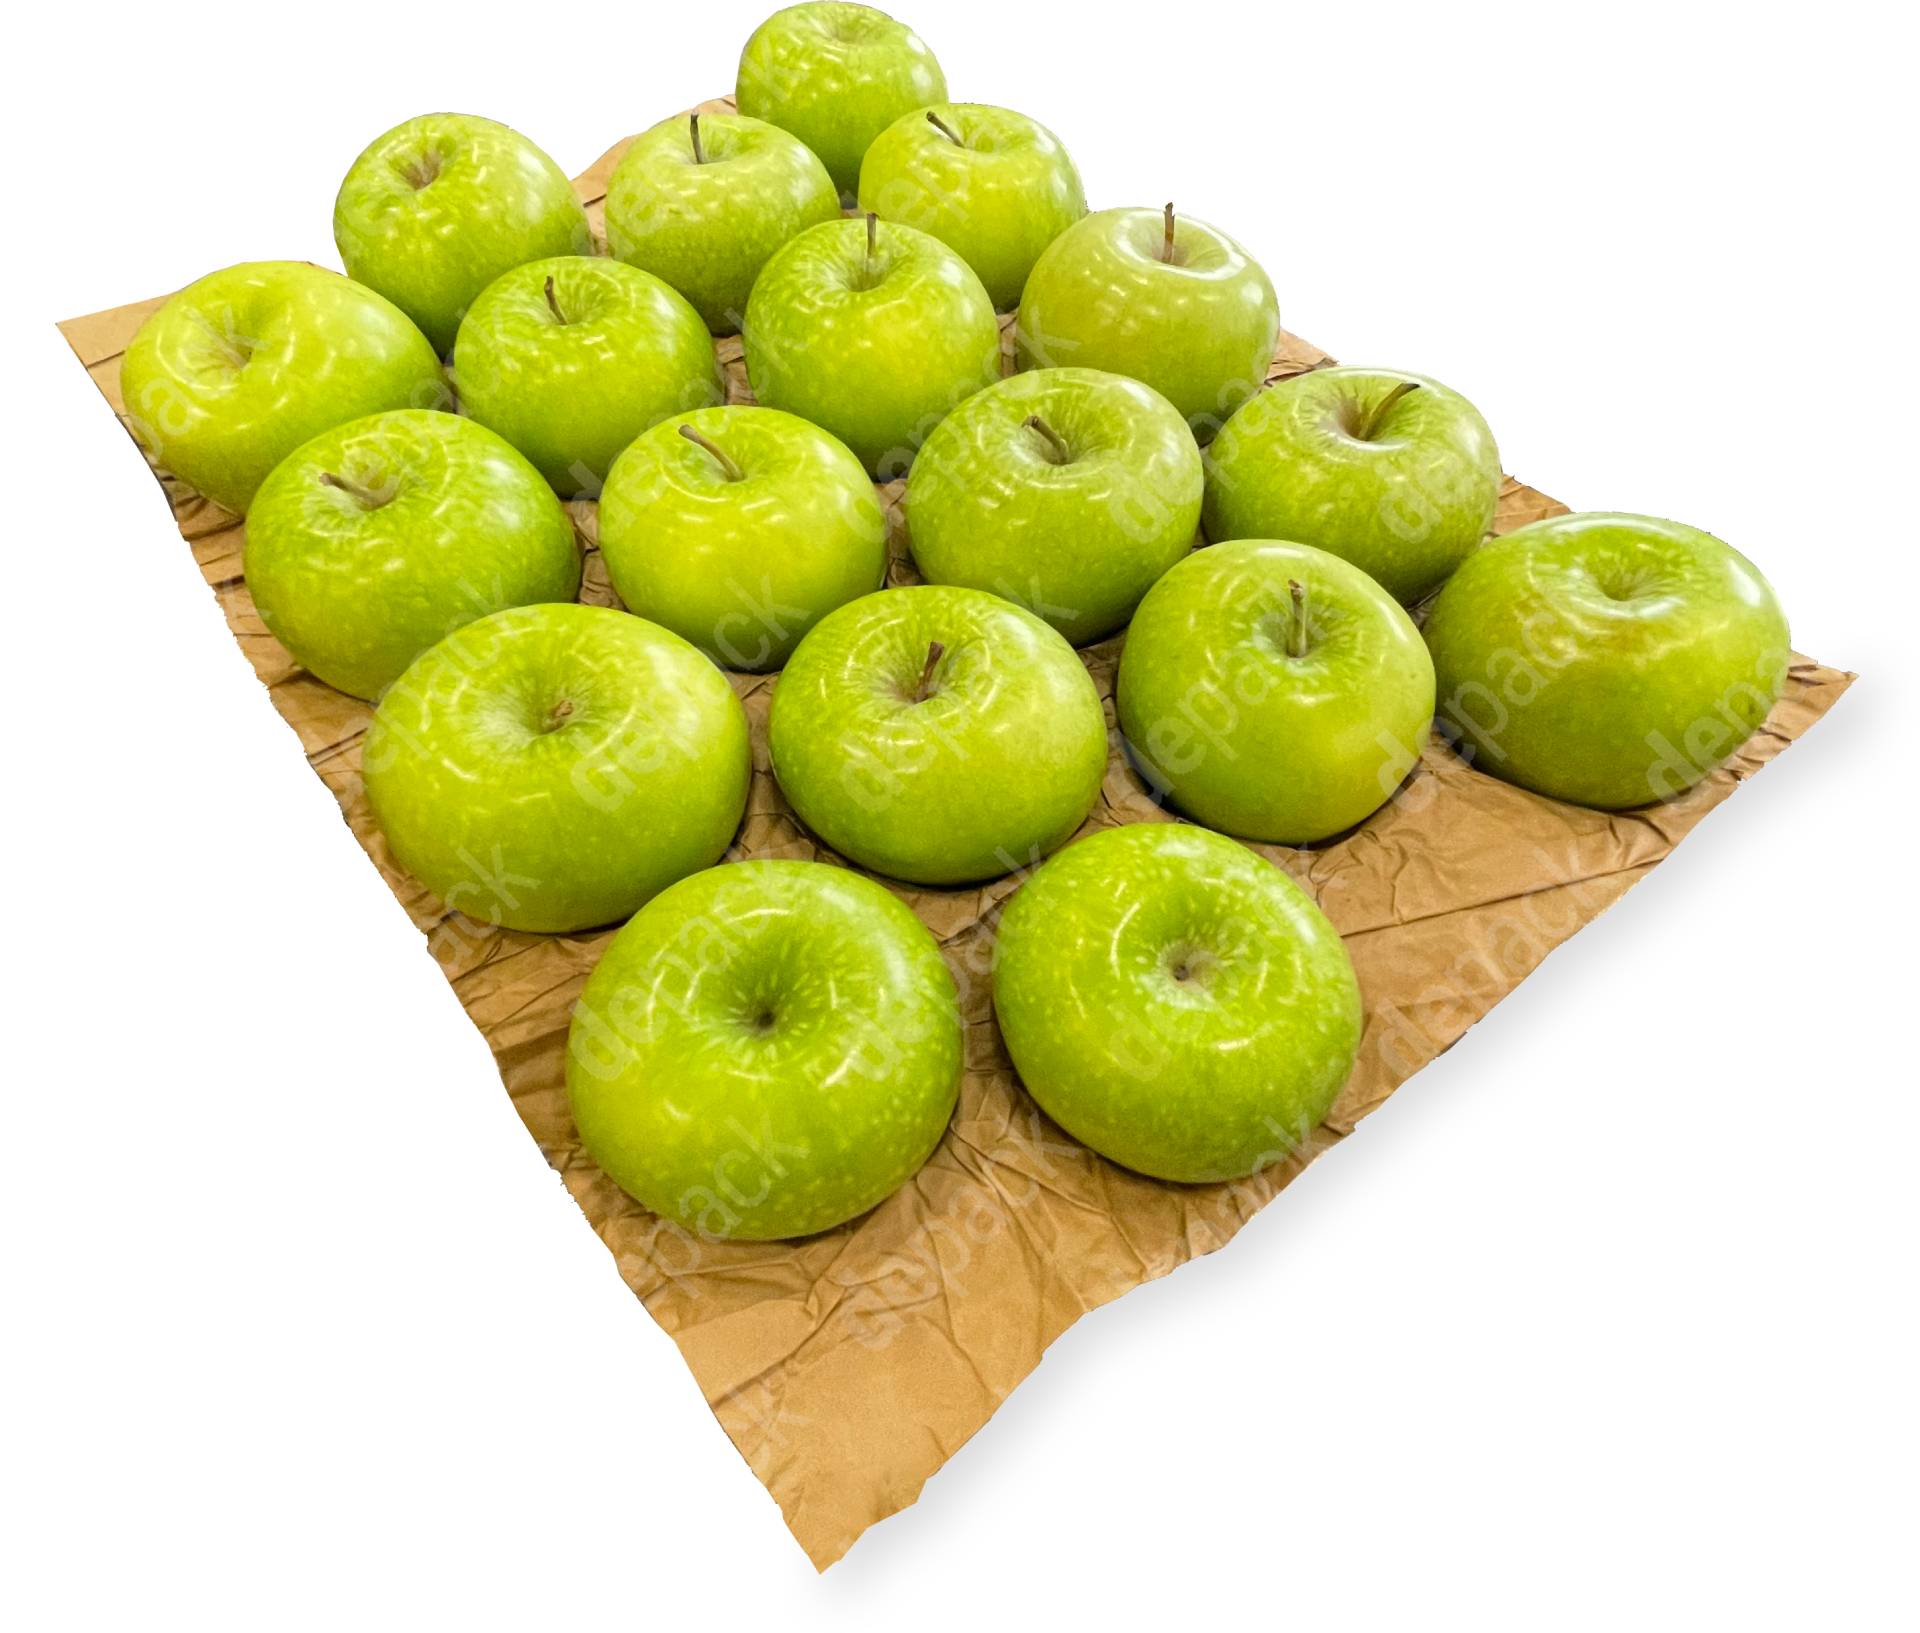 Depack Packaging Paper Tray filled with green apples